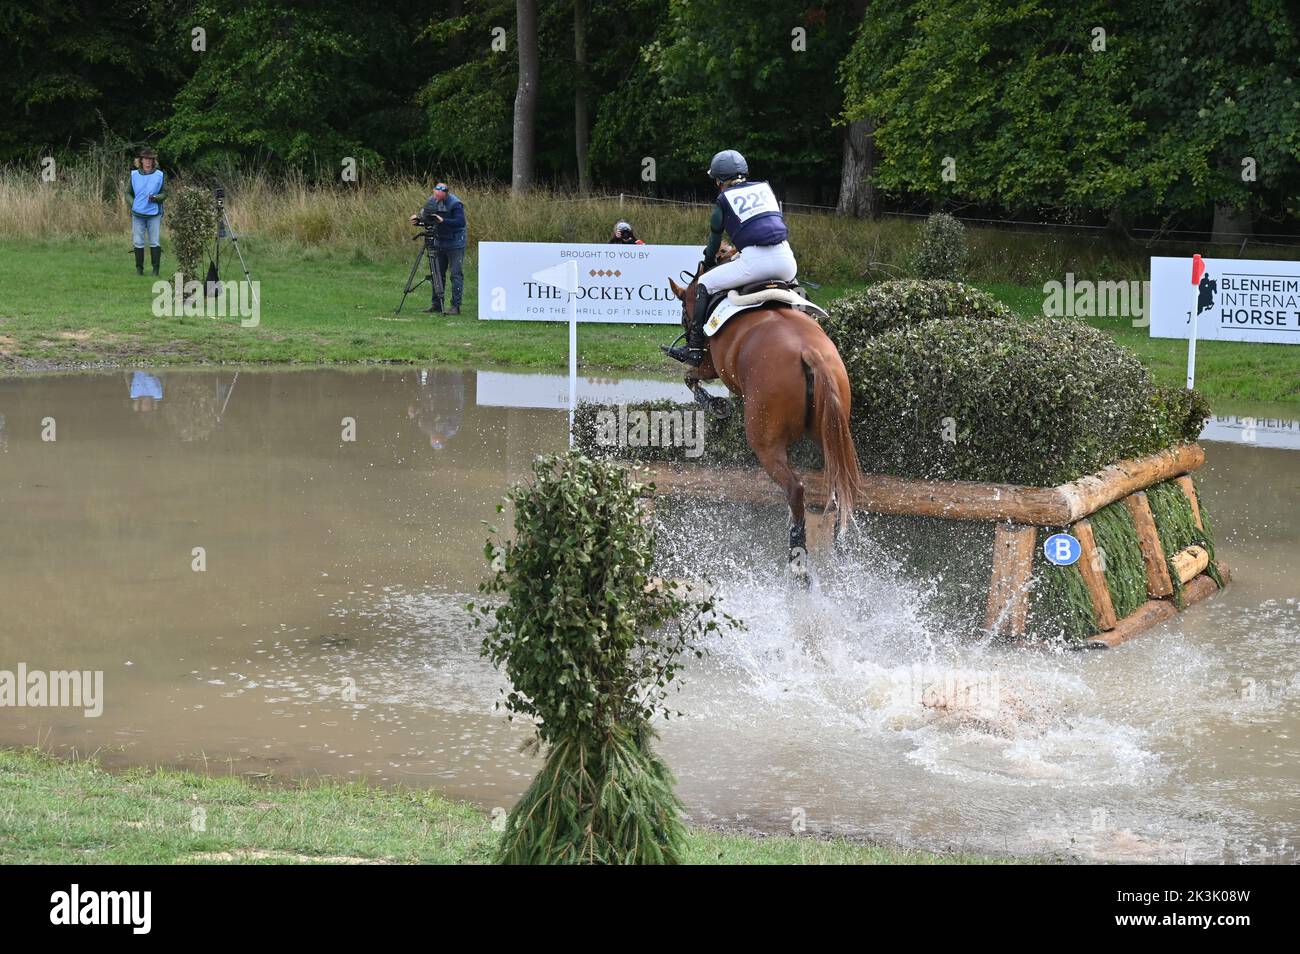 Eliza Stoddart on Idonna W, cross country phase of the CCI4*-S compettion, Blenheim Palace International Horse Trials, Blenheim Palace, Woodstock, Oxf Stock Photo